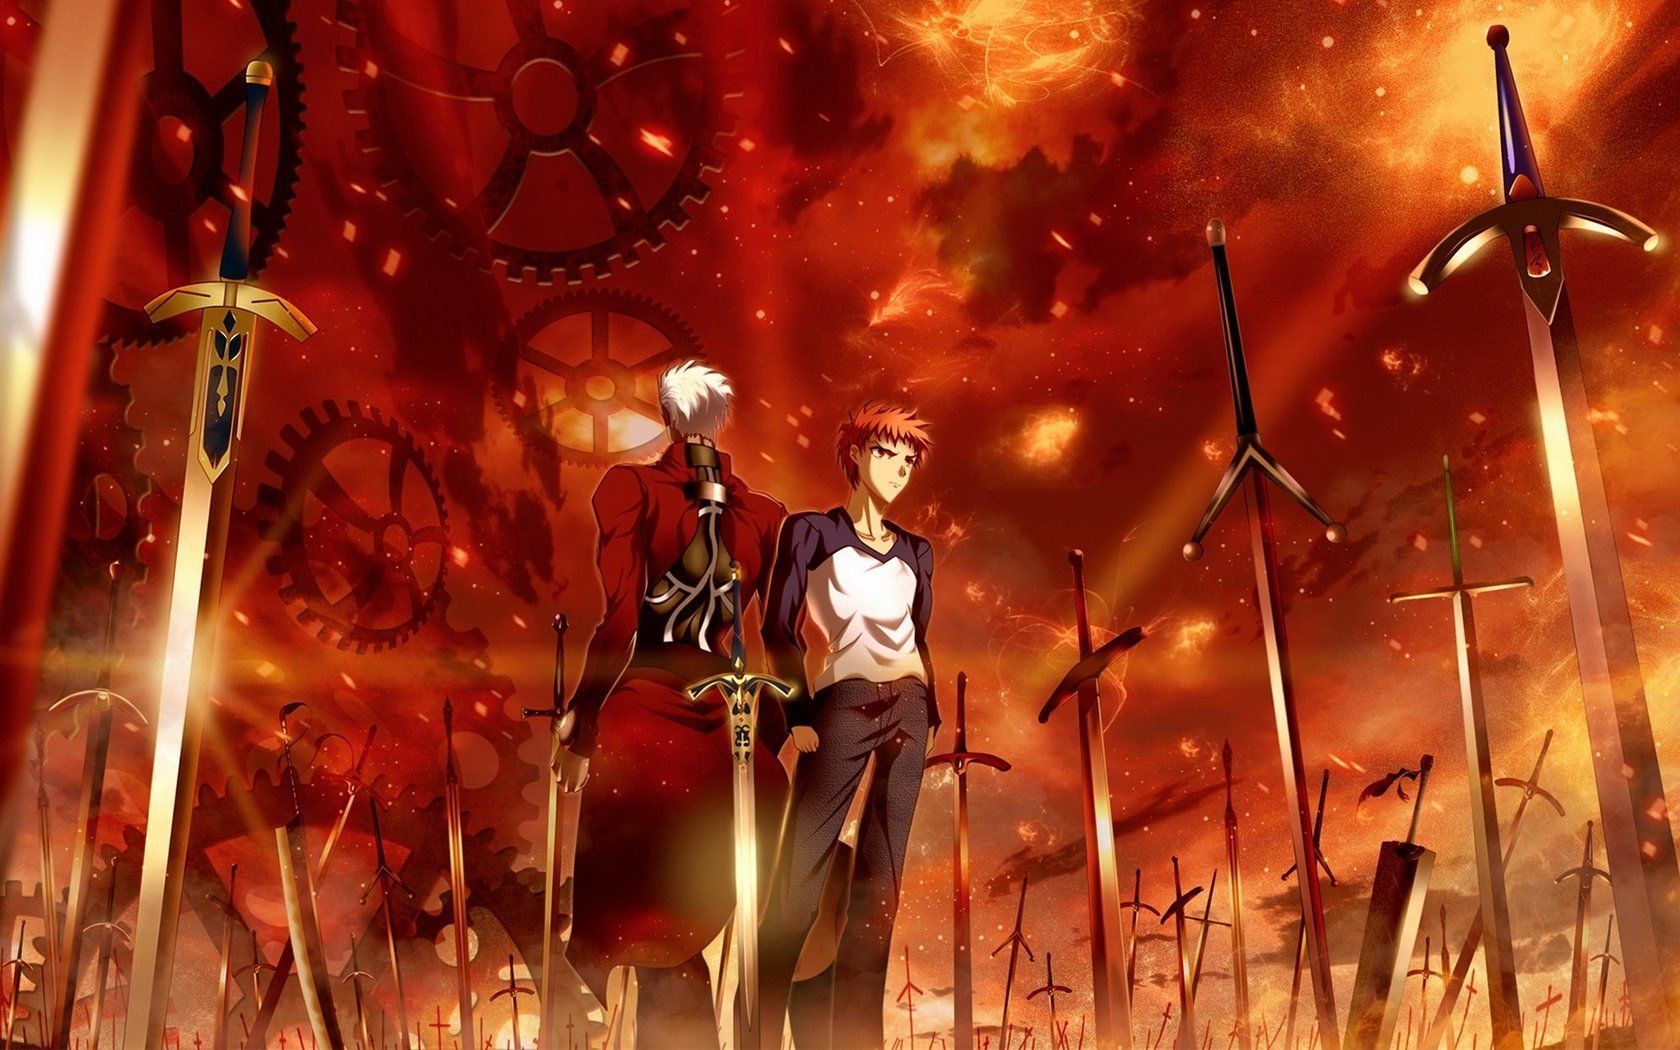 Anime Fate Stay Night: Unlimited Blade Works Fate Stay Night Archer (Fate Stay Night) Shirou Emiya Wallpaper. Zero Wallpaper, Fate Stay Night, Anime